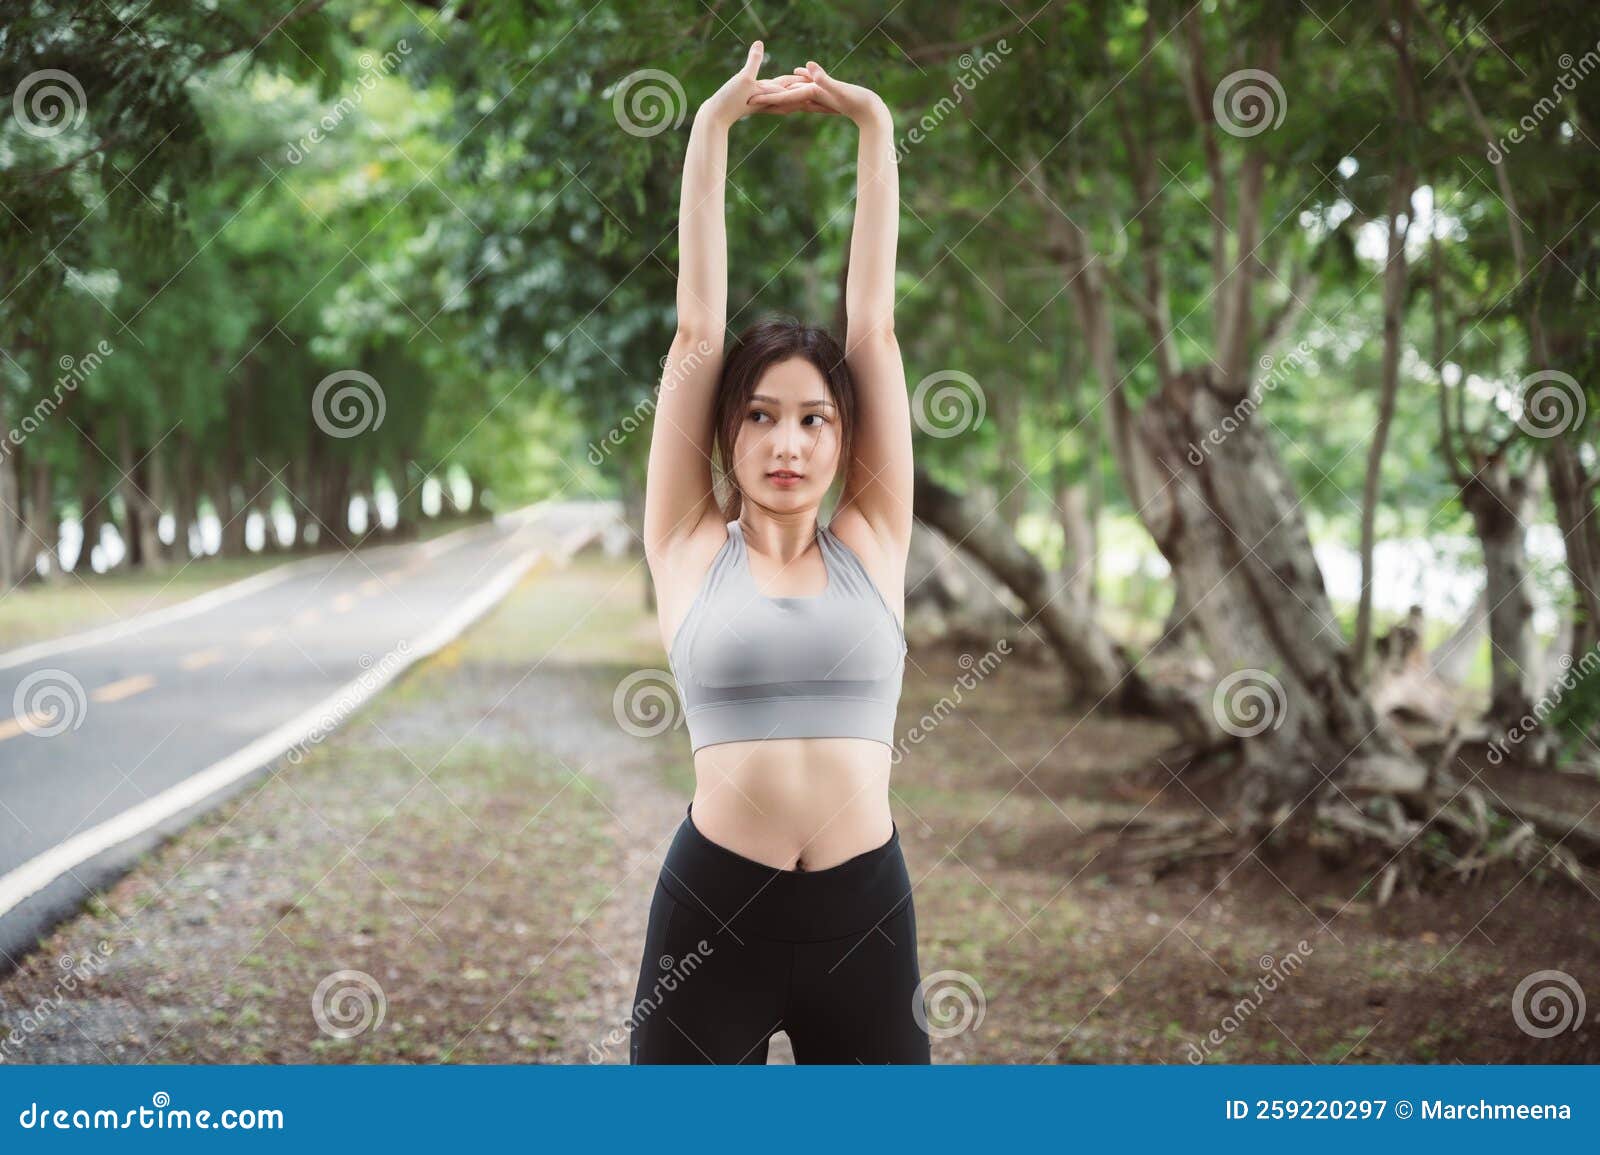 Asian Woman Trainer is Engaged in Fitness in Public Park Stock Image ...